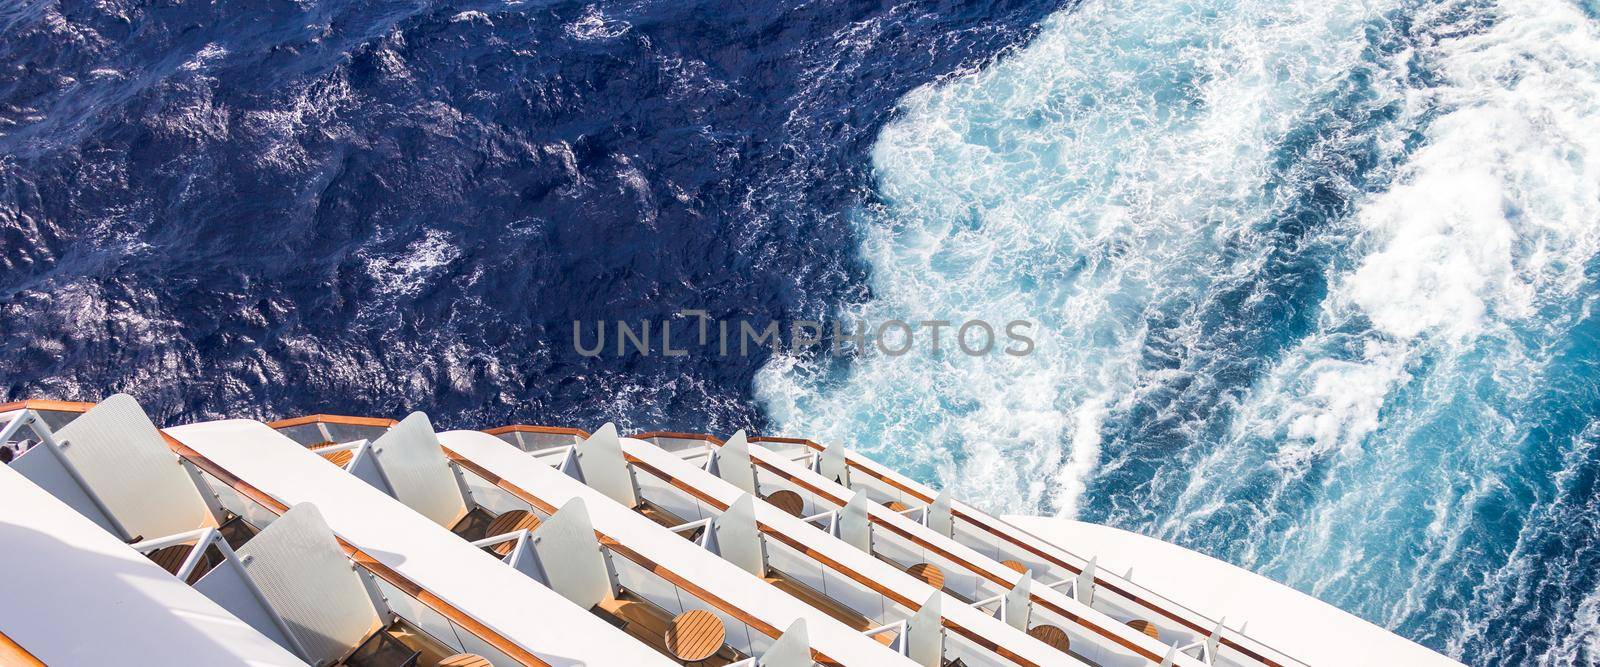 Balconies on a backof Cruise ship, decks with wake or trail on ocean surface